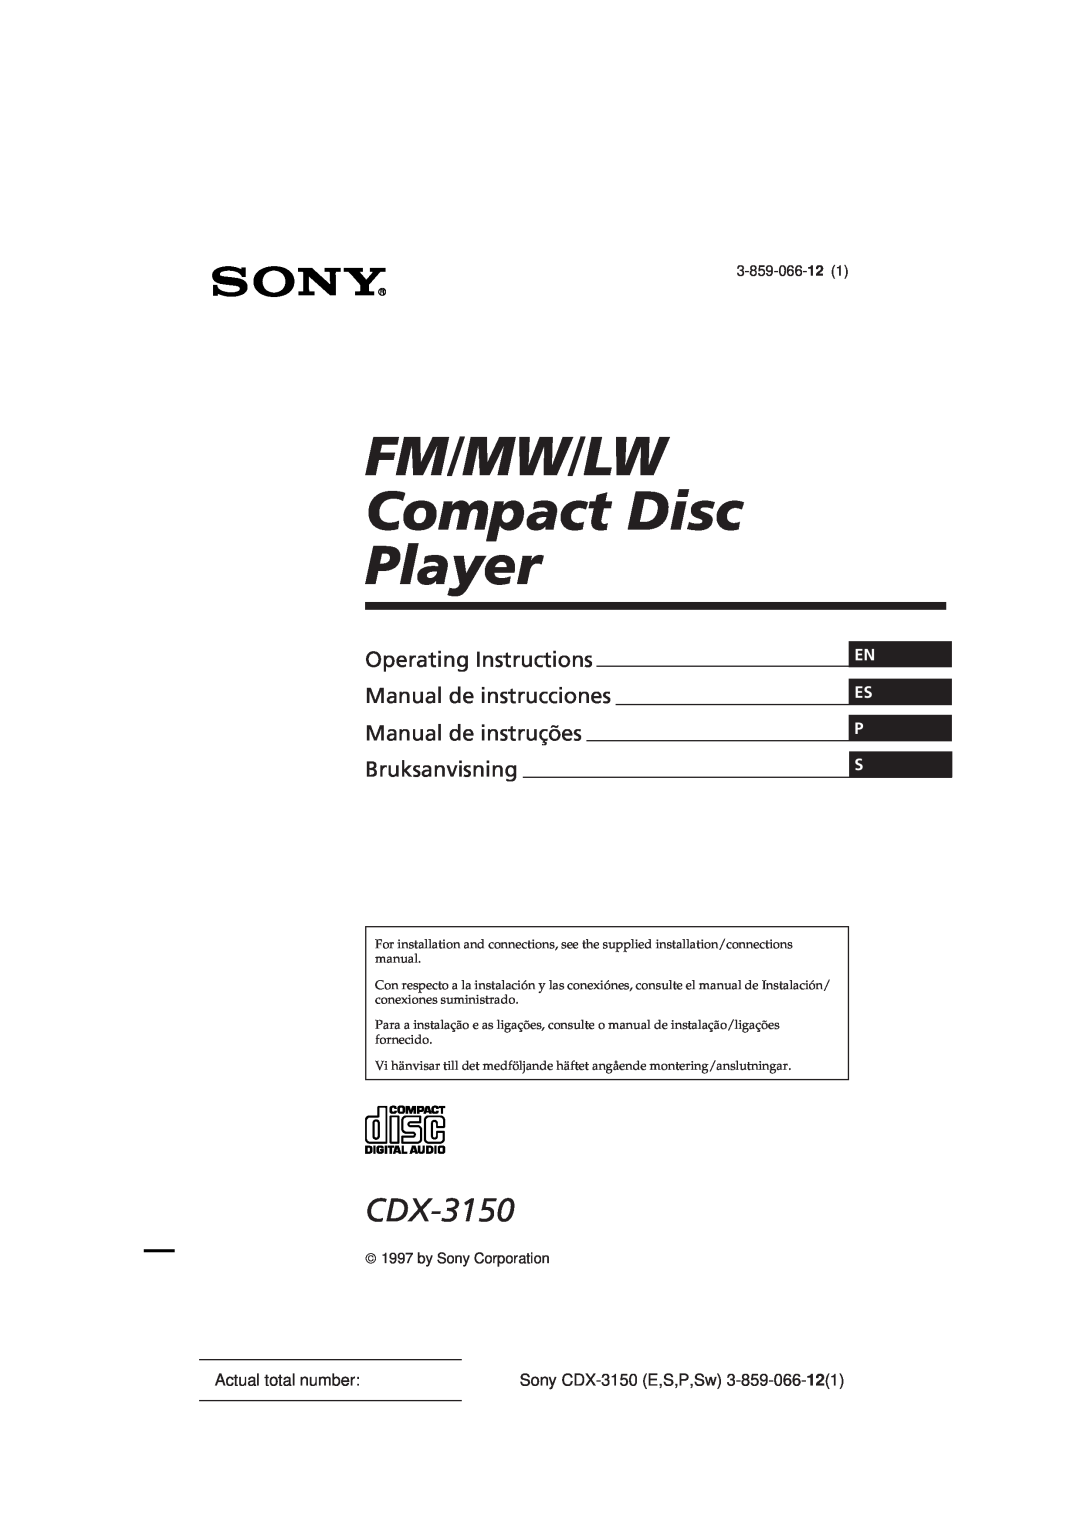 Sony manual En Es P S, Actual total number, 3-859-066-12, by Sony Corporation, Sony CDX-3150E,S,P,Sw 